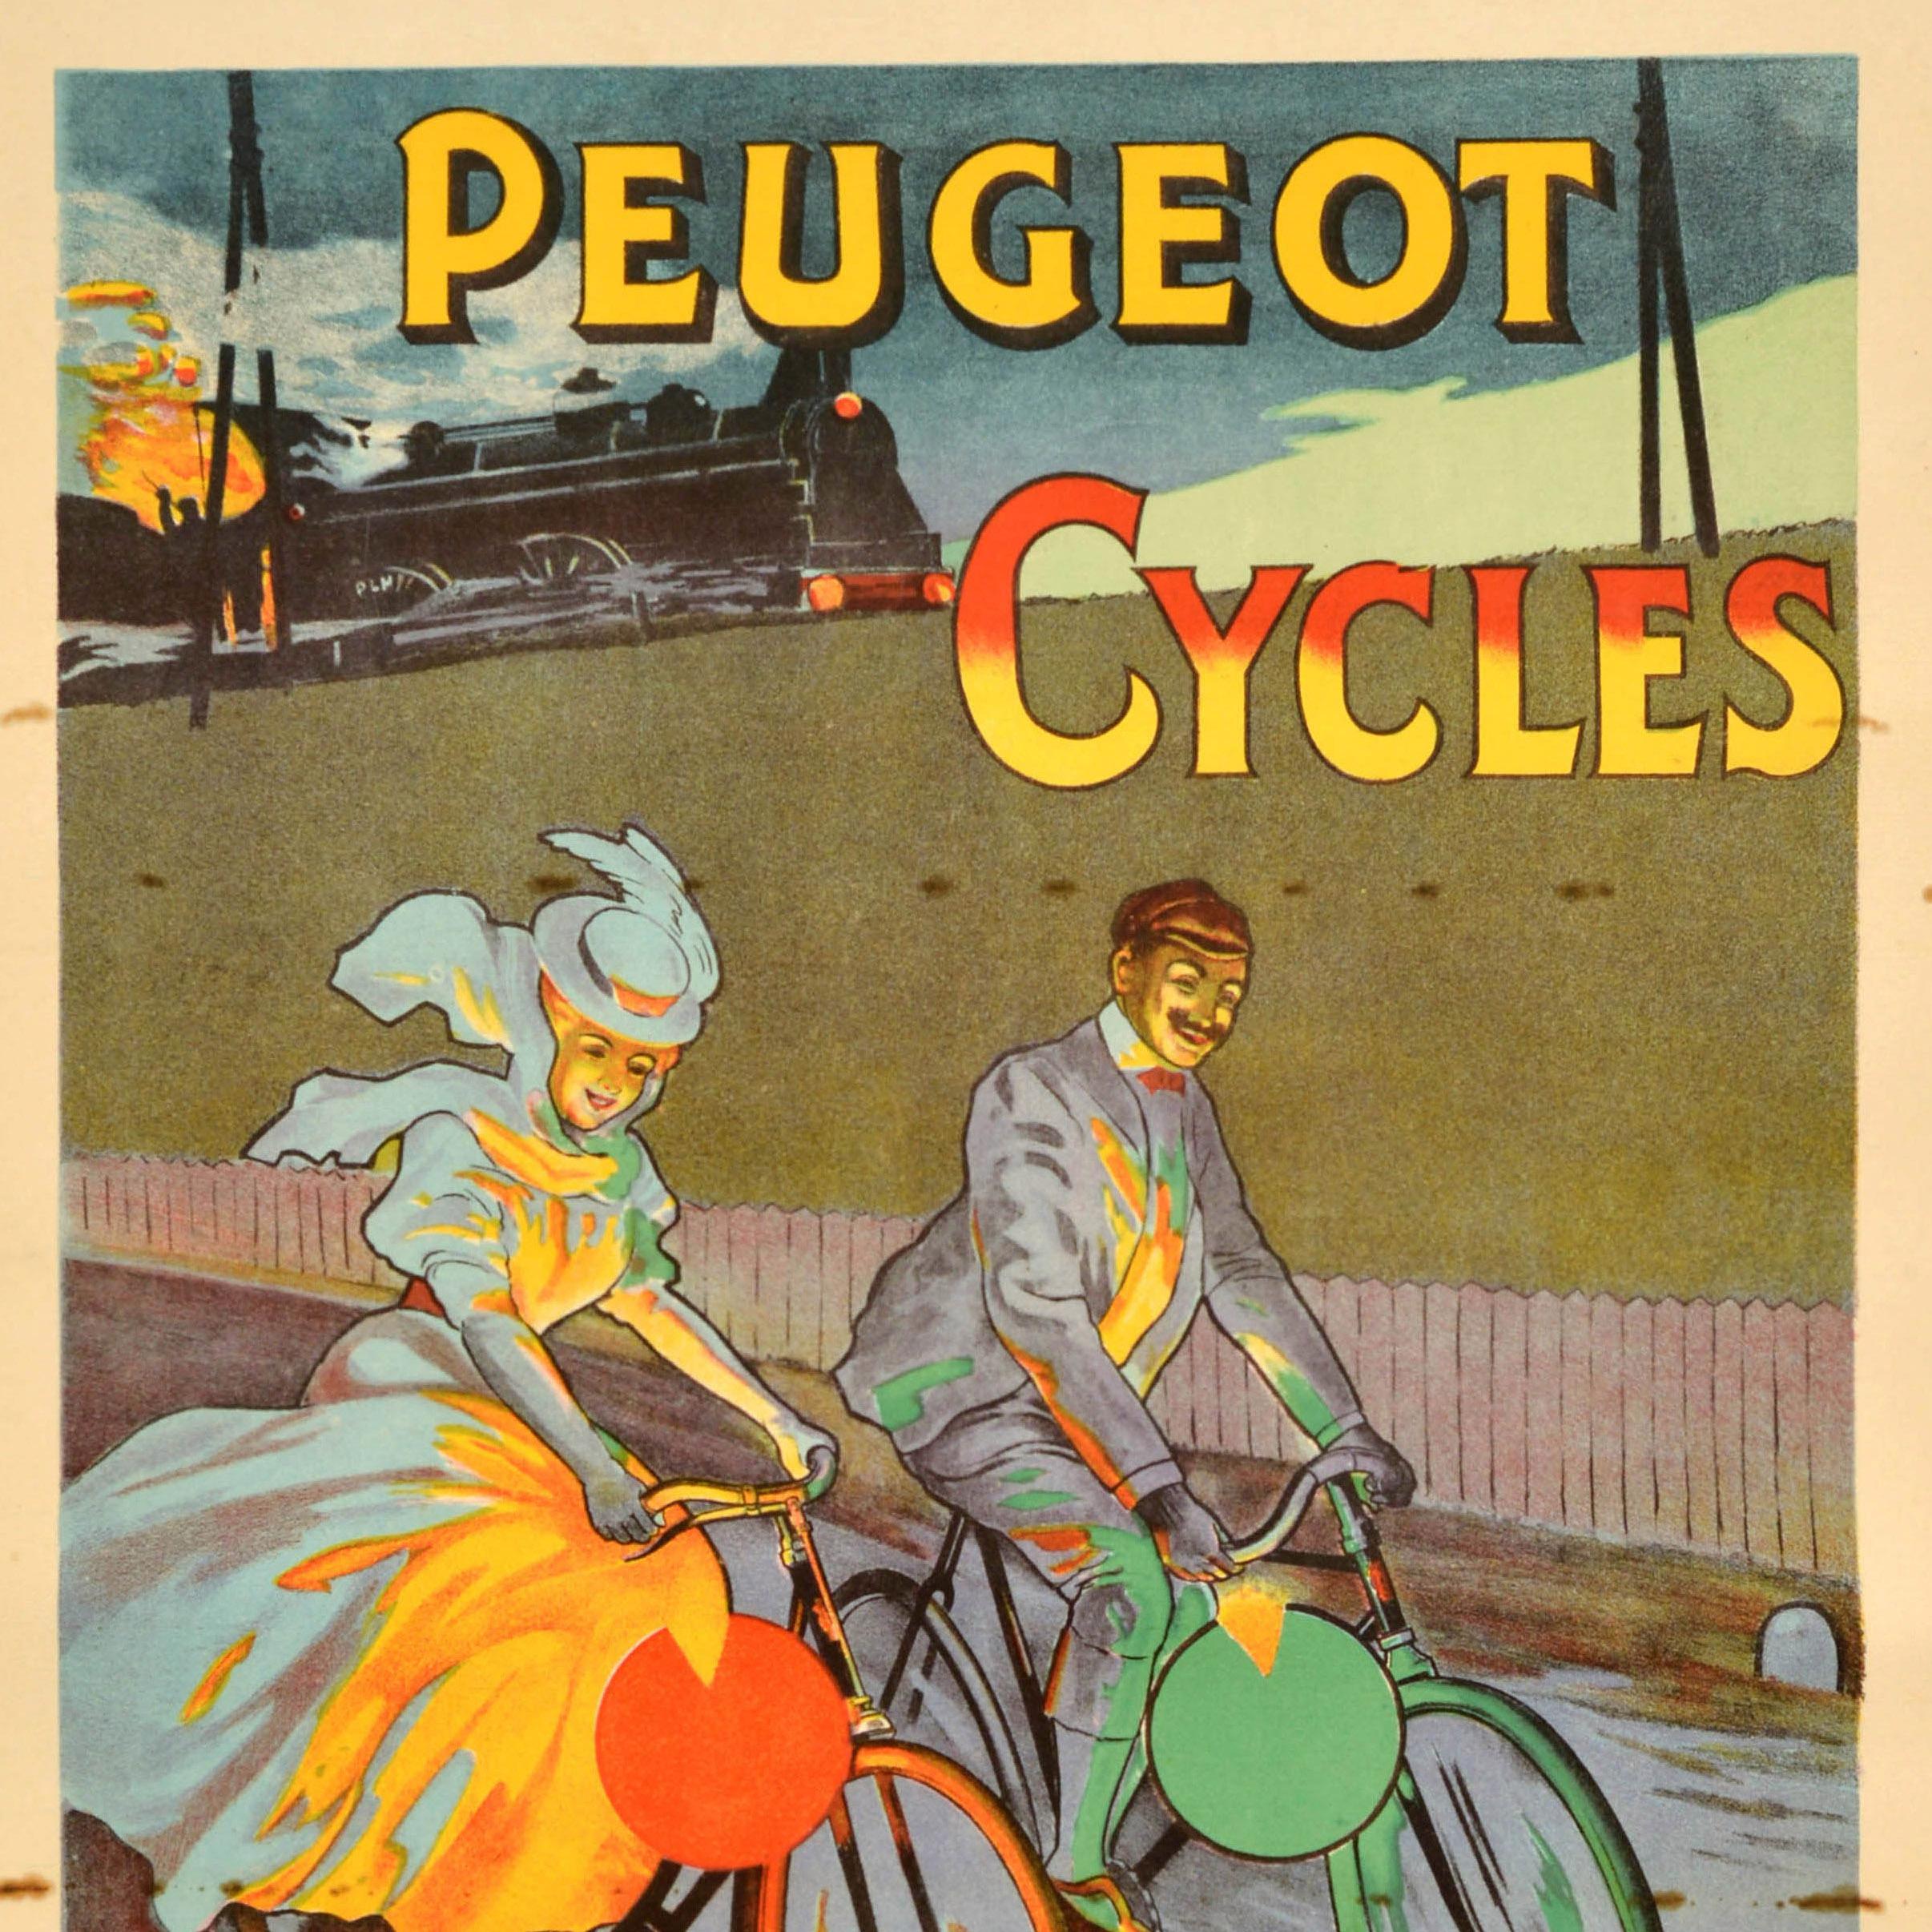 Original Antique Bicycle Advertising Poster Peugeot Cycles Valentigney Doubs - Beige Print by Almery Lobel-Riche